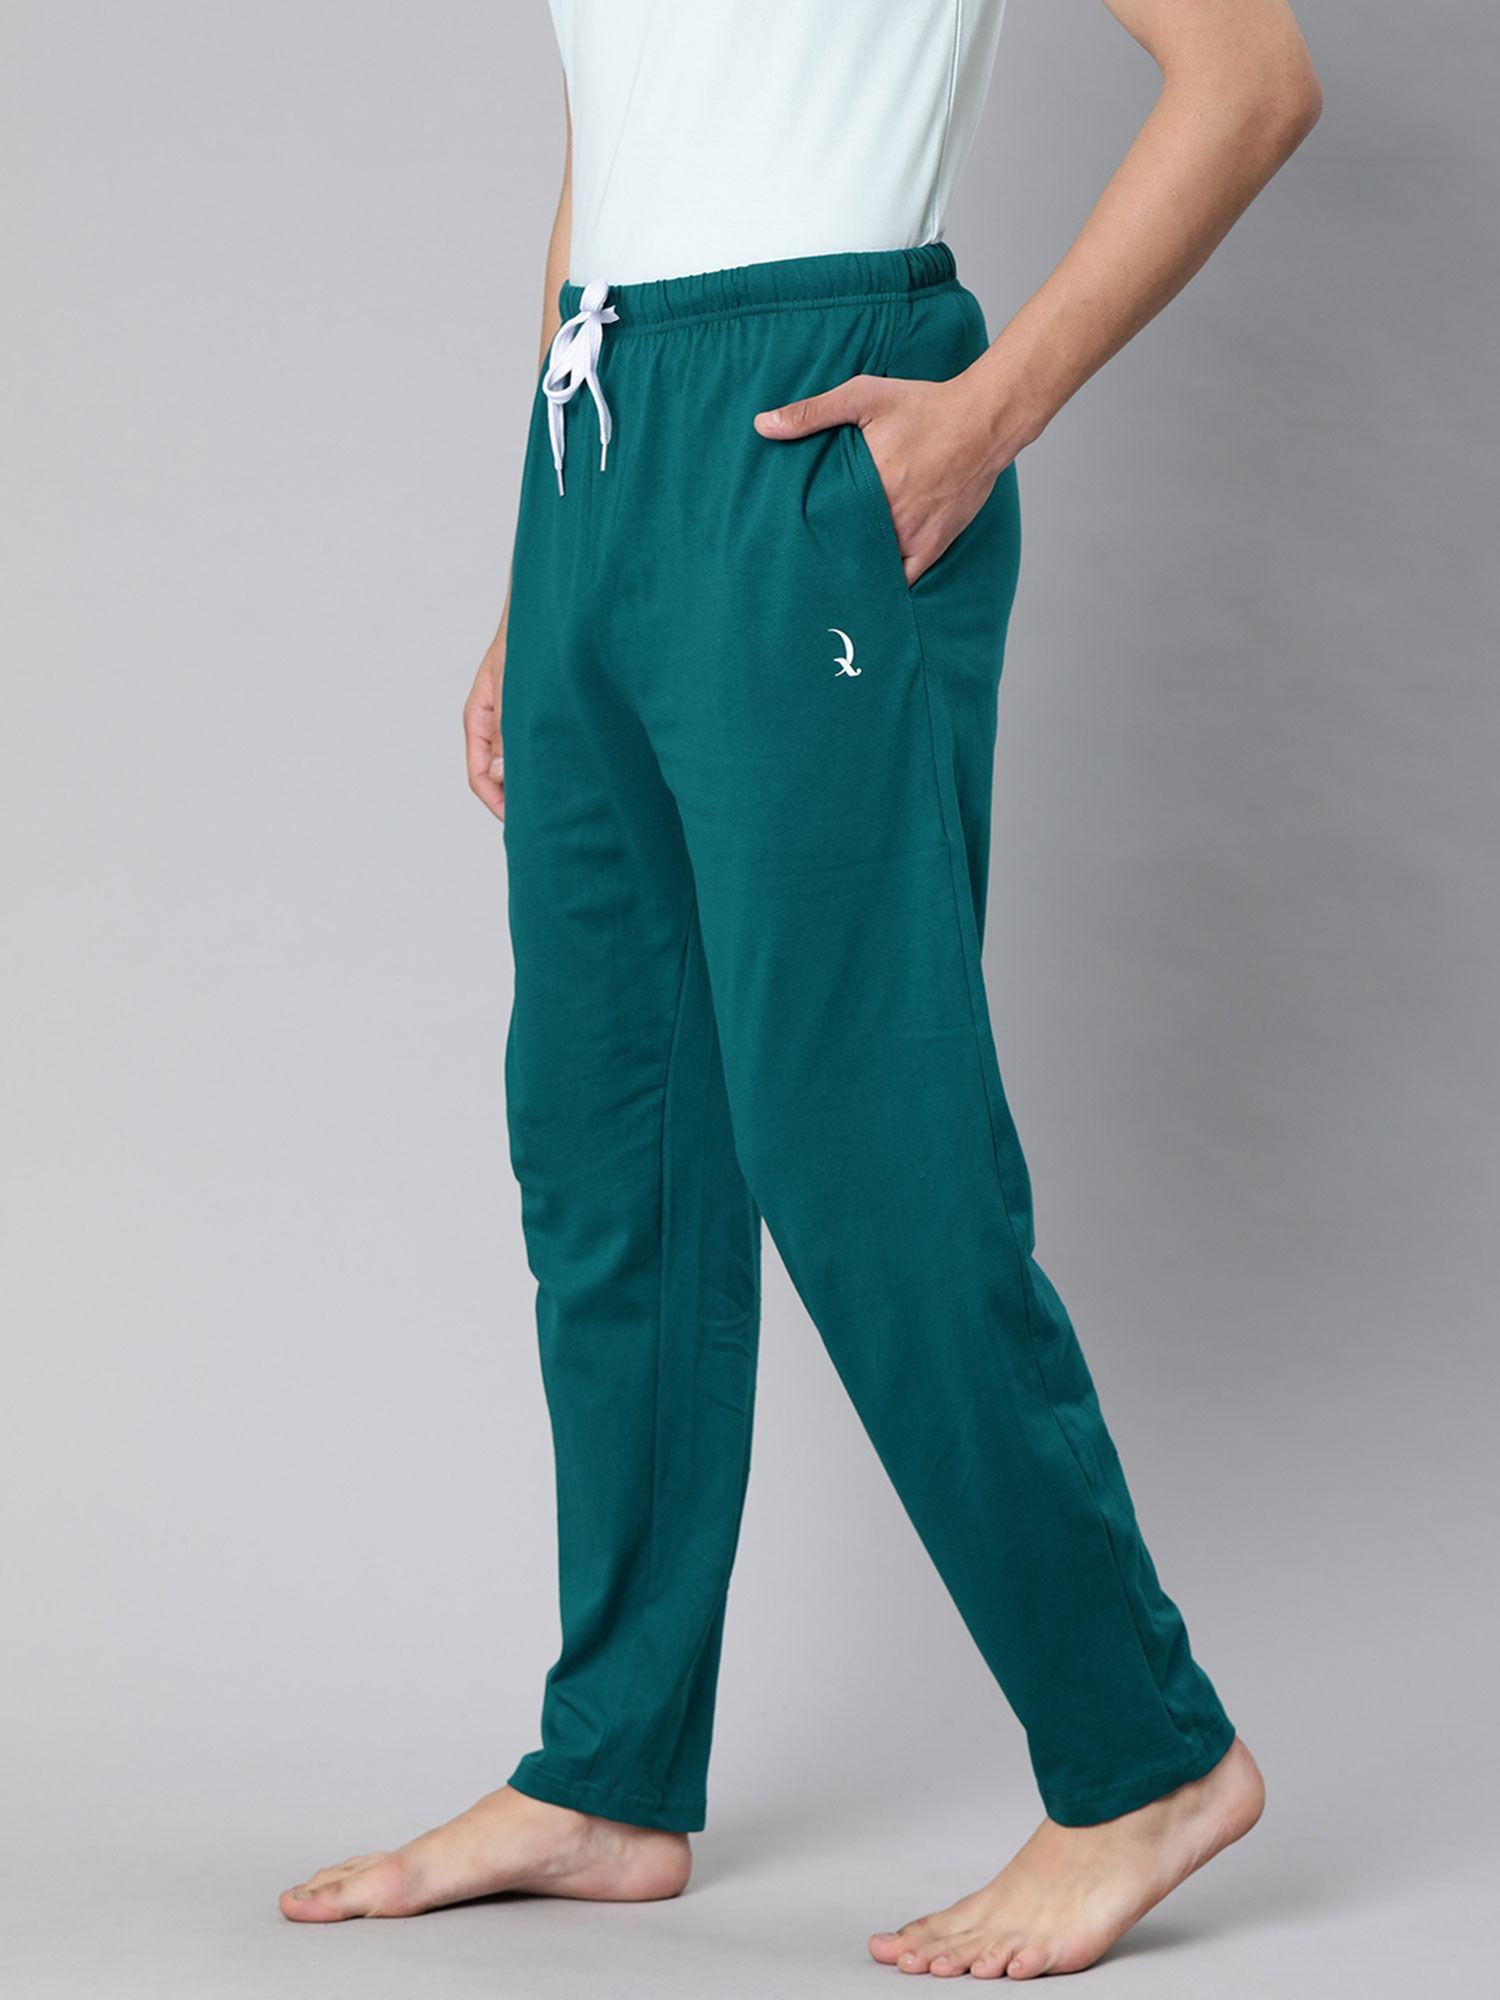 teal cotton track pant